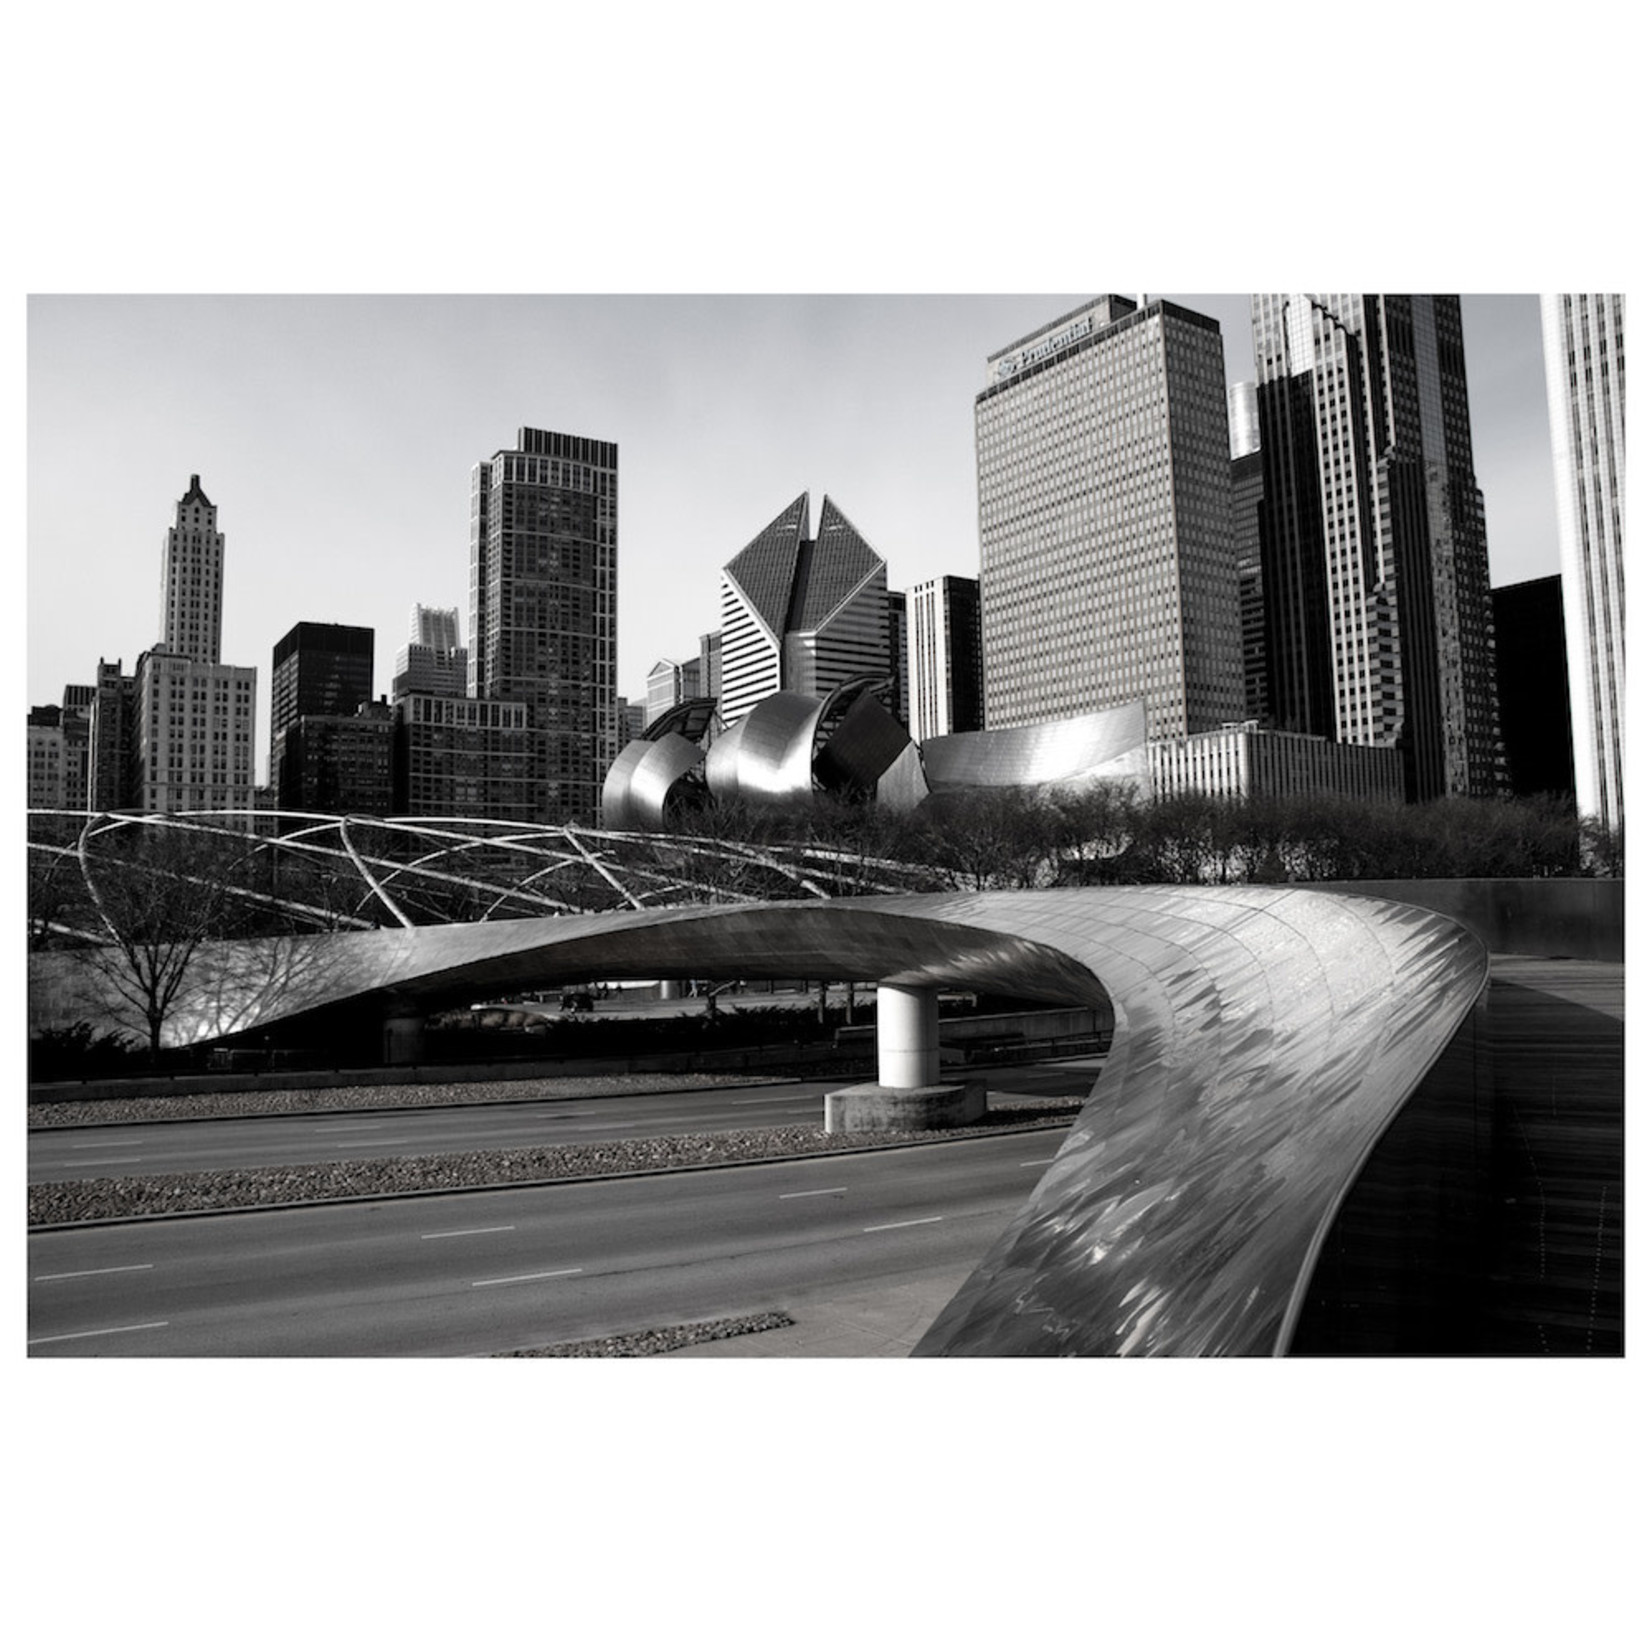 The Picturalist | Fine Art Print on Rag Paper Frank Gehry's Bridge at Millenium Park by Ugo Shirvanian